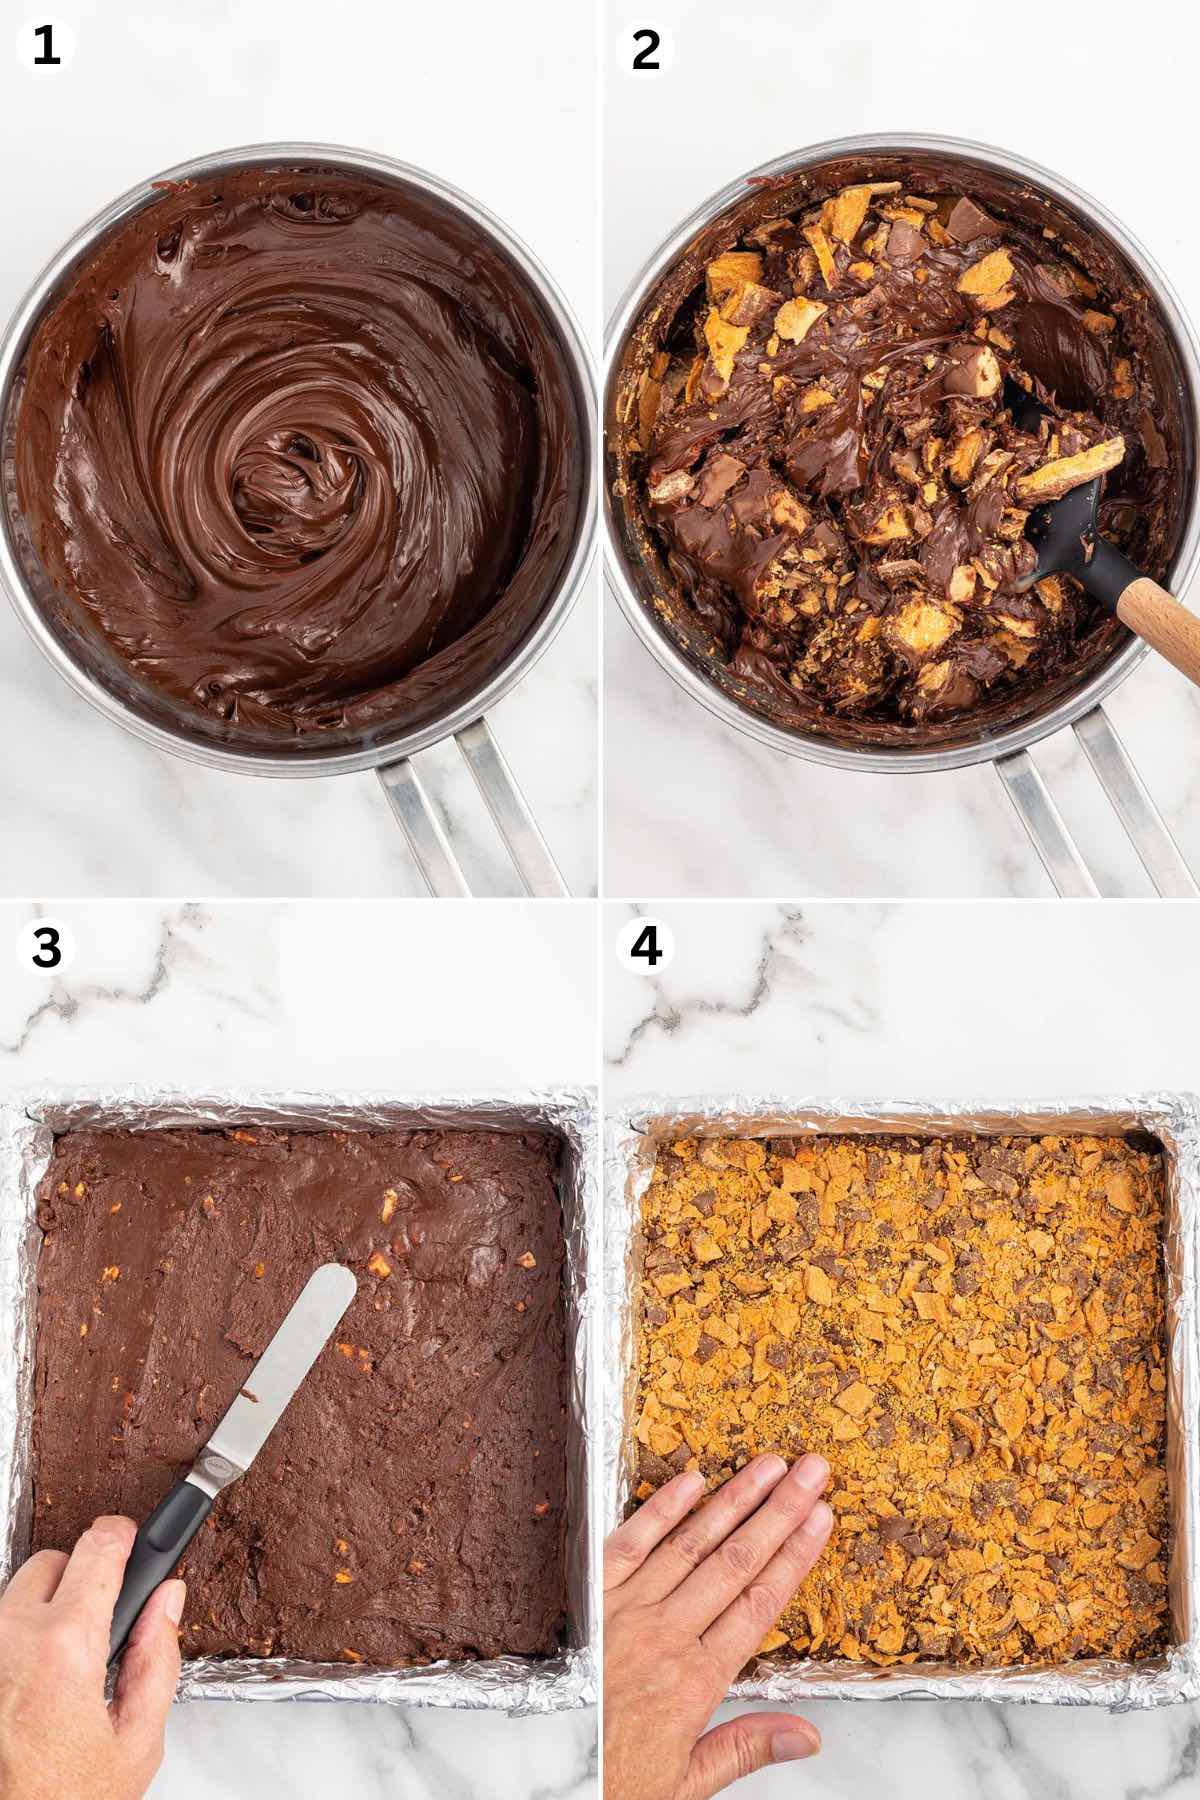 Melt the chocolate chips and add the other ingredients. Fold in the chopped candies. Spread the mixture into the pan. Add more chopped candies on top.